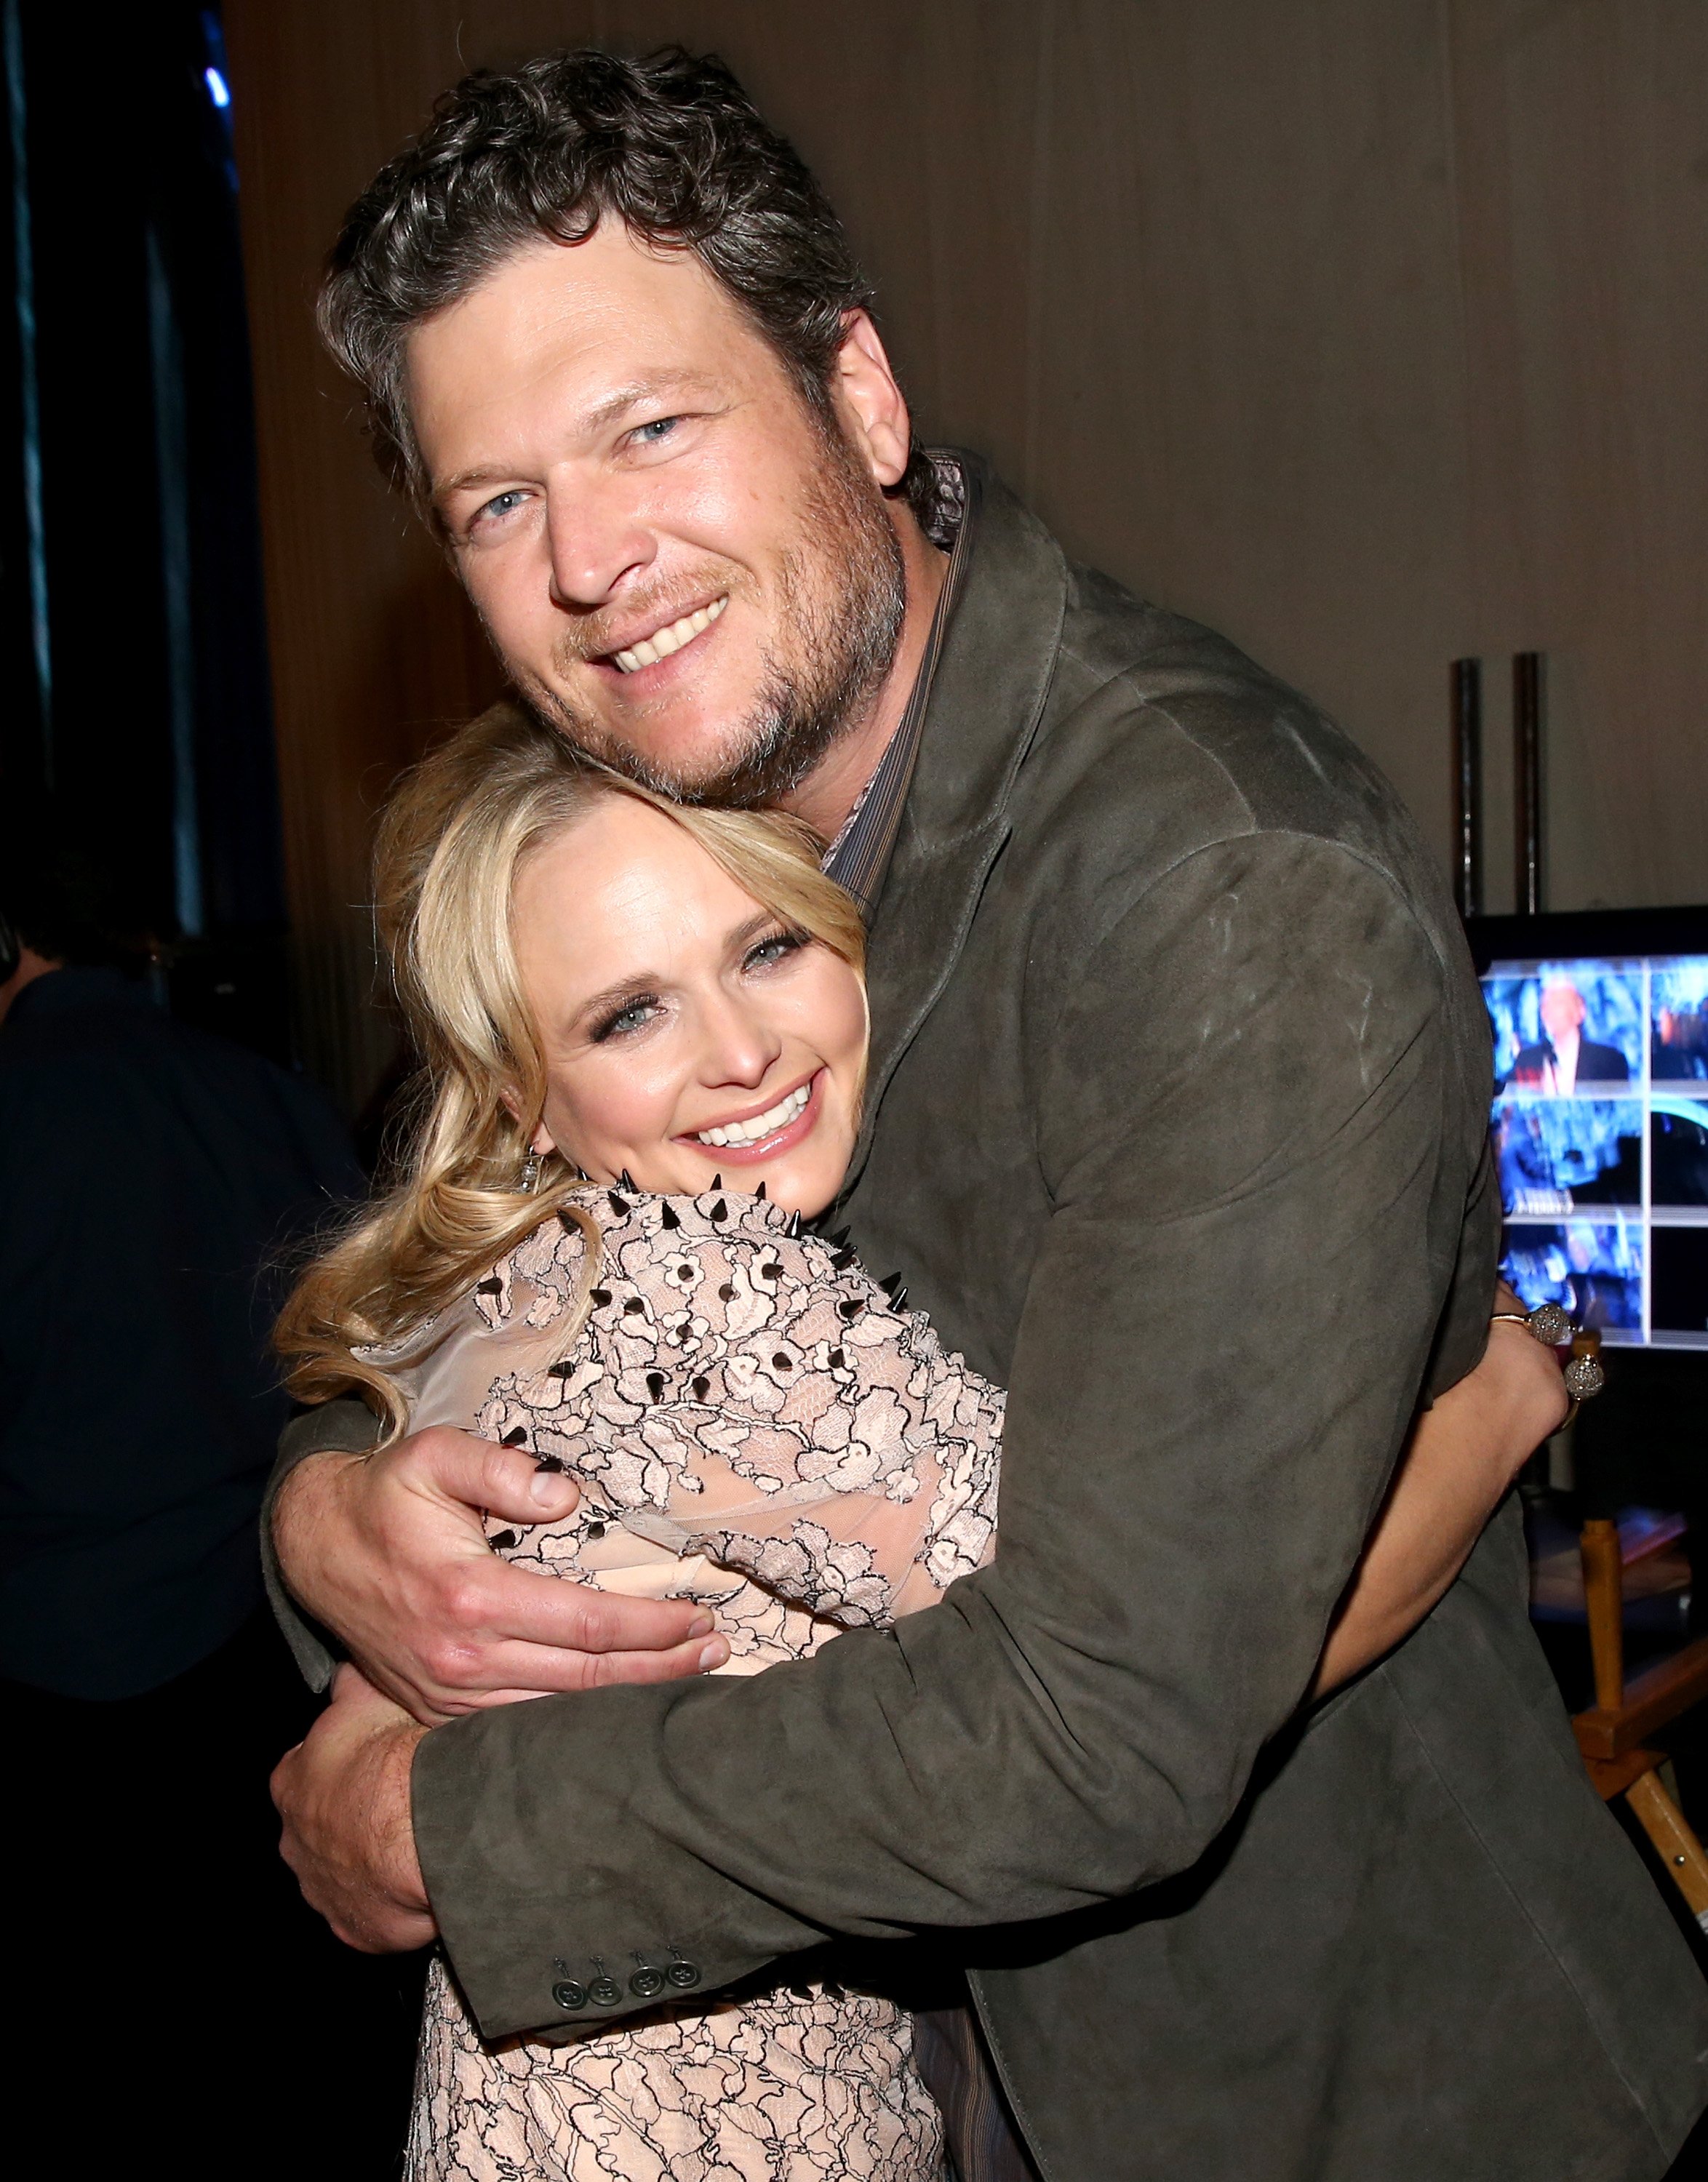 Miranda Lambert and Blake Shelton attend the 2014 MusiCares Person Of The Year honoring Carole King at Los Angeles Convention Center on January 24, 2014 in Los Angeles, California. | Source: Getty Images